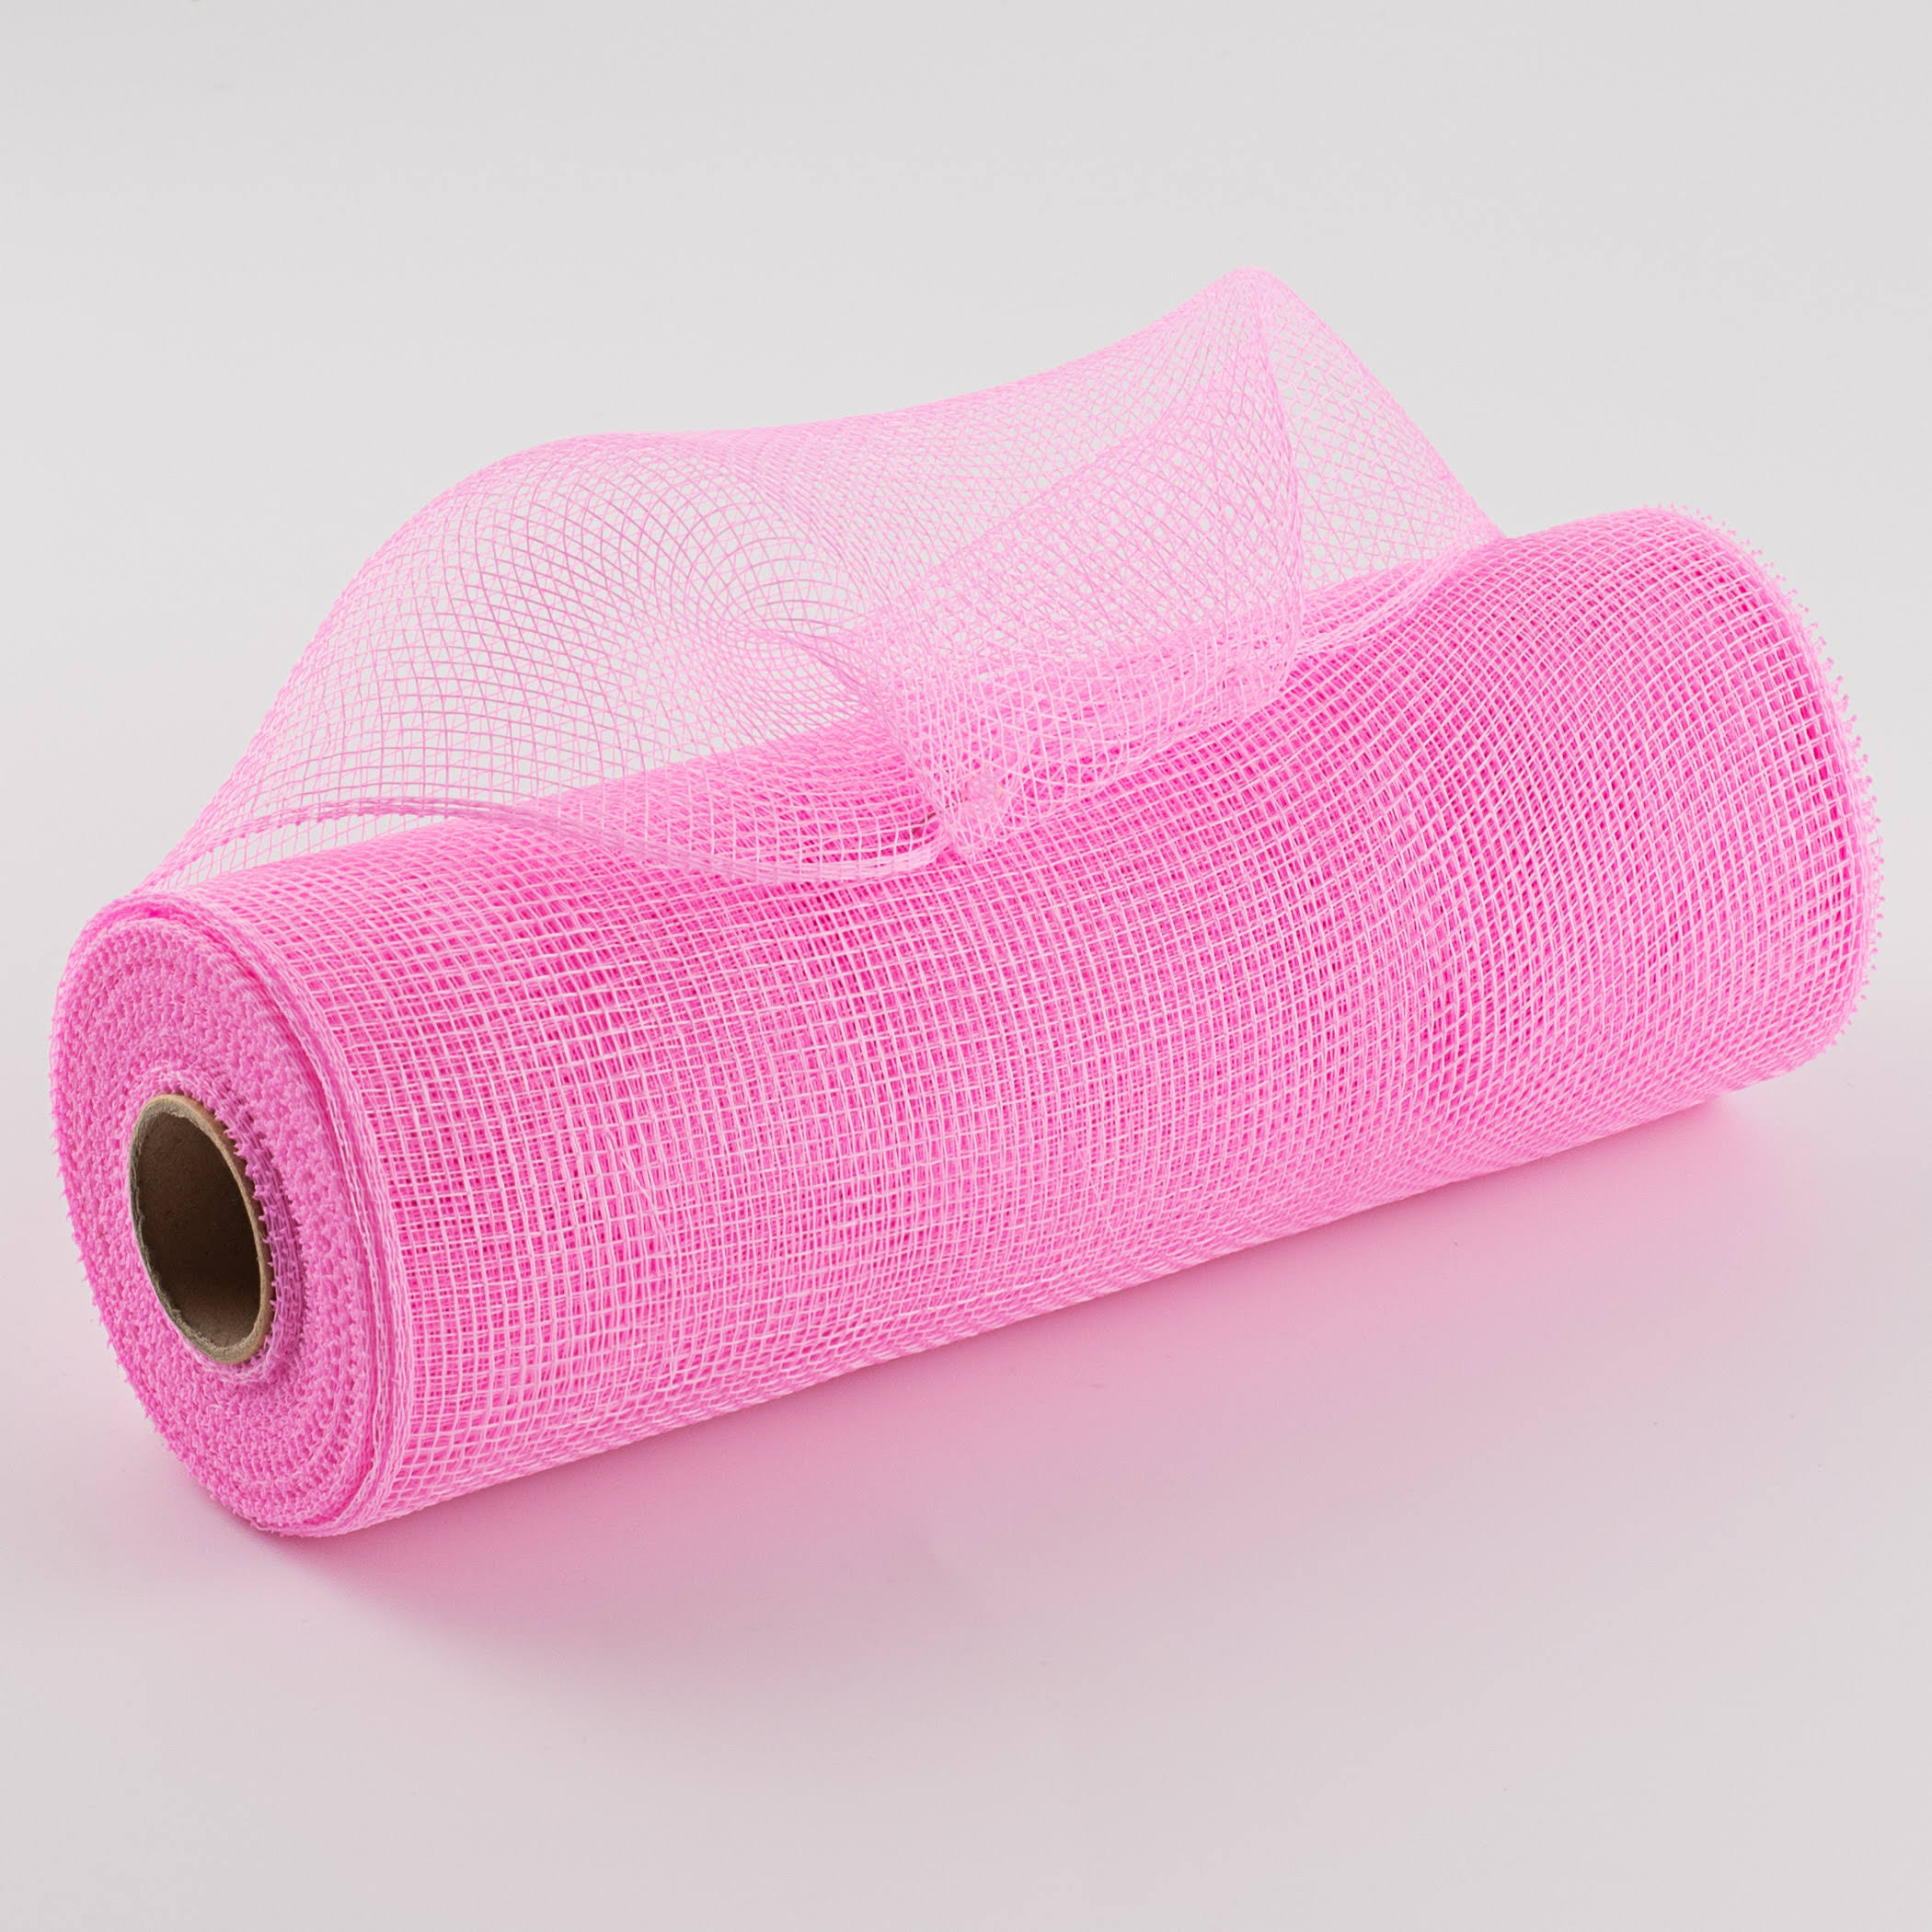 10" Poly Deco Mesh: Pink (10 Yards) RE130222